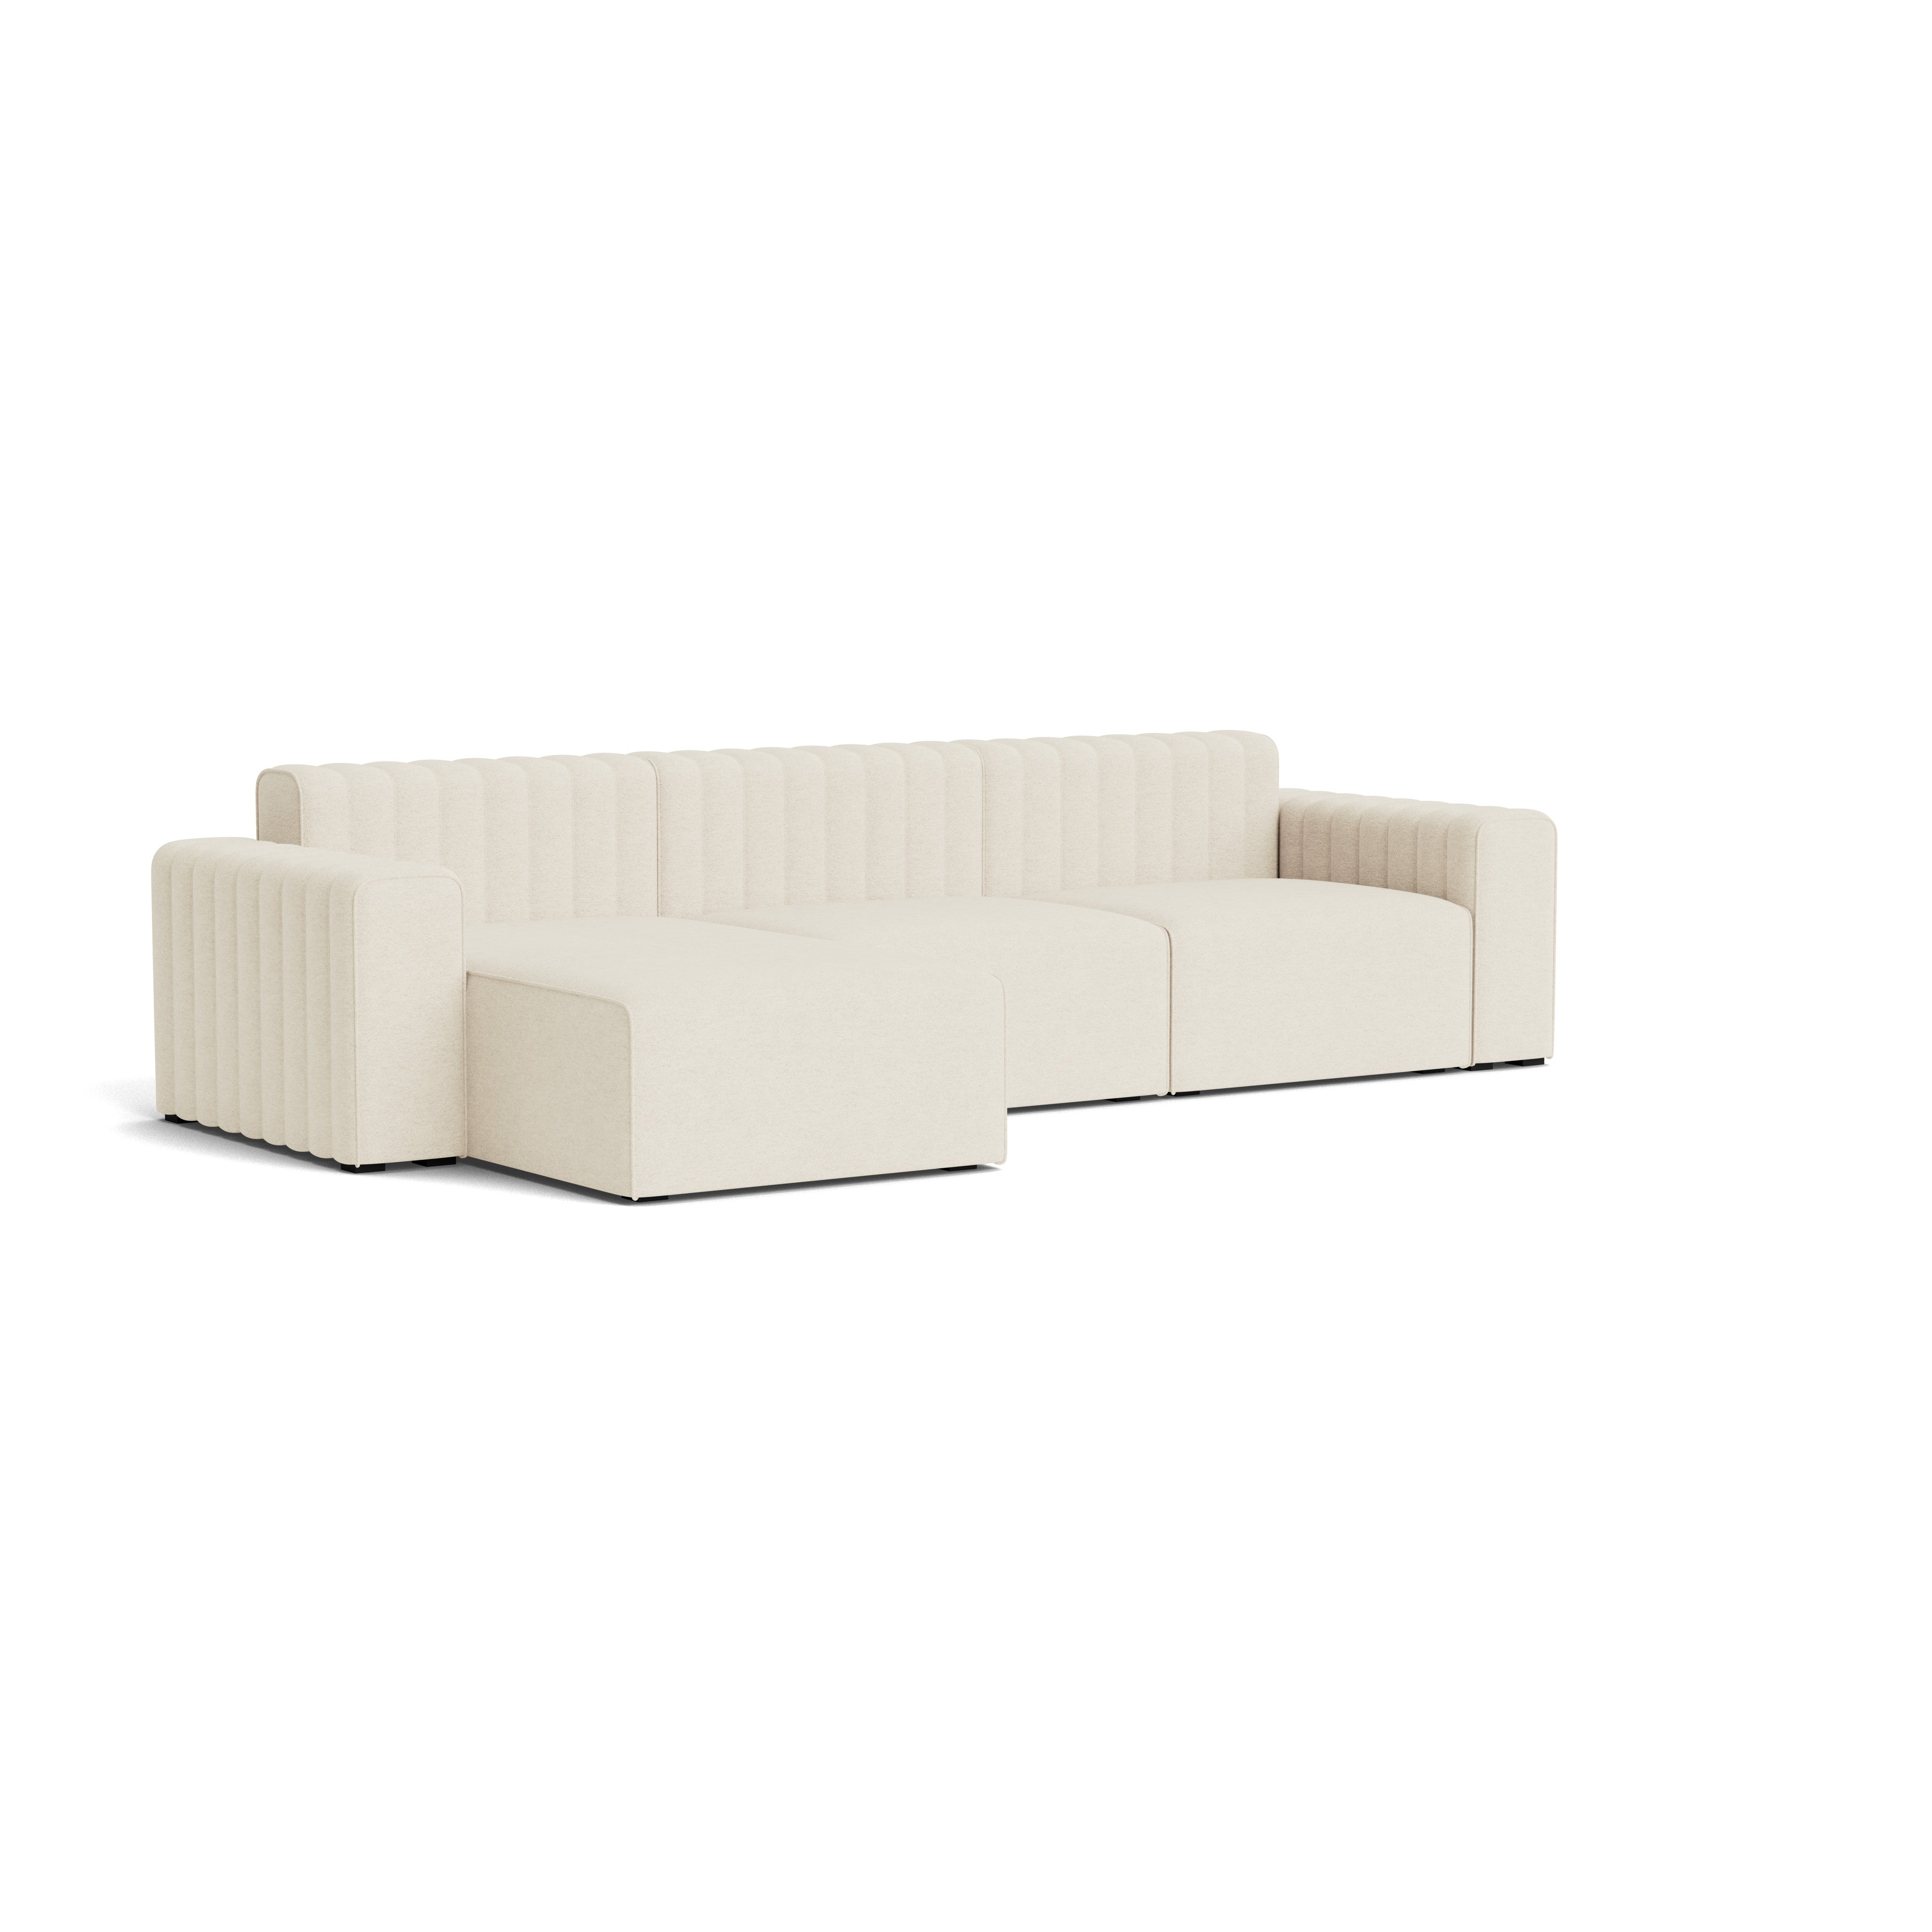 RIFF Sofa, Three Seater with Chaise Lounge Right (Left Arm, Center, Chaise Longue Right)